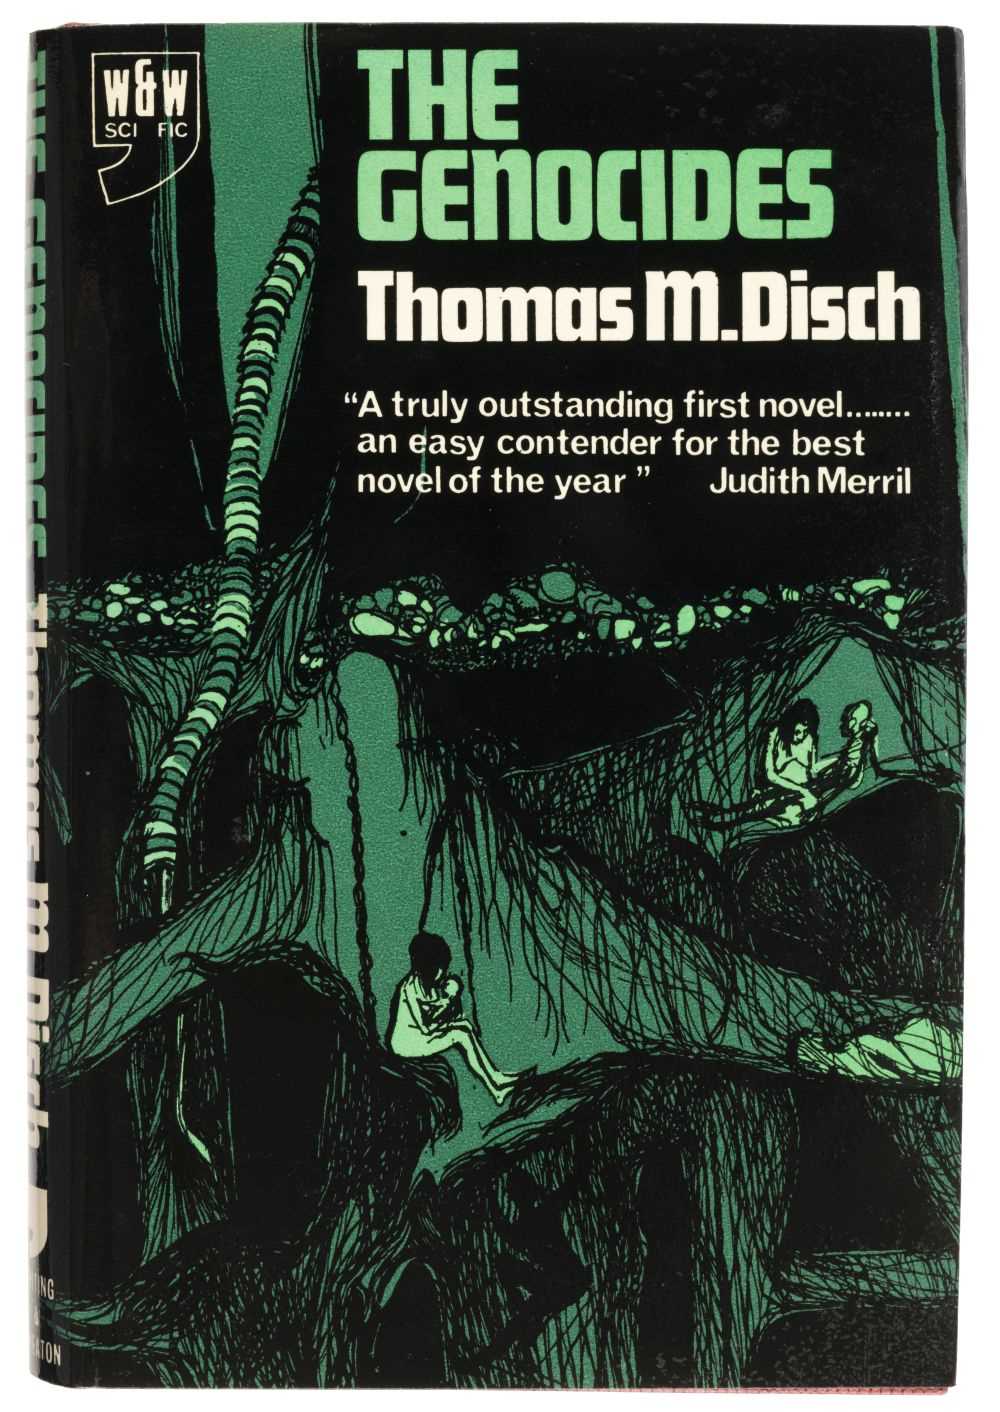 Lot 523 - Disch (Thomas M.) The Genocides, 1st UK edition, 1967